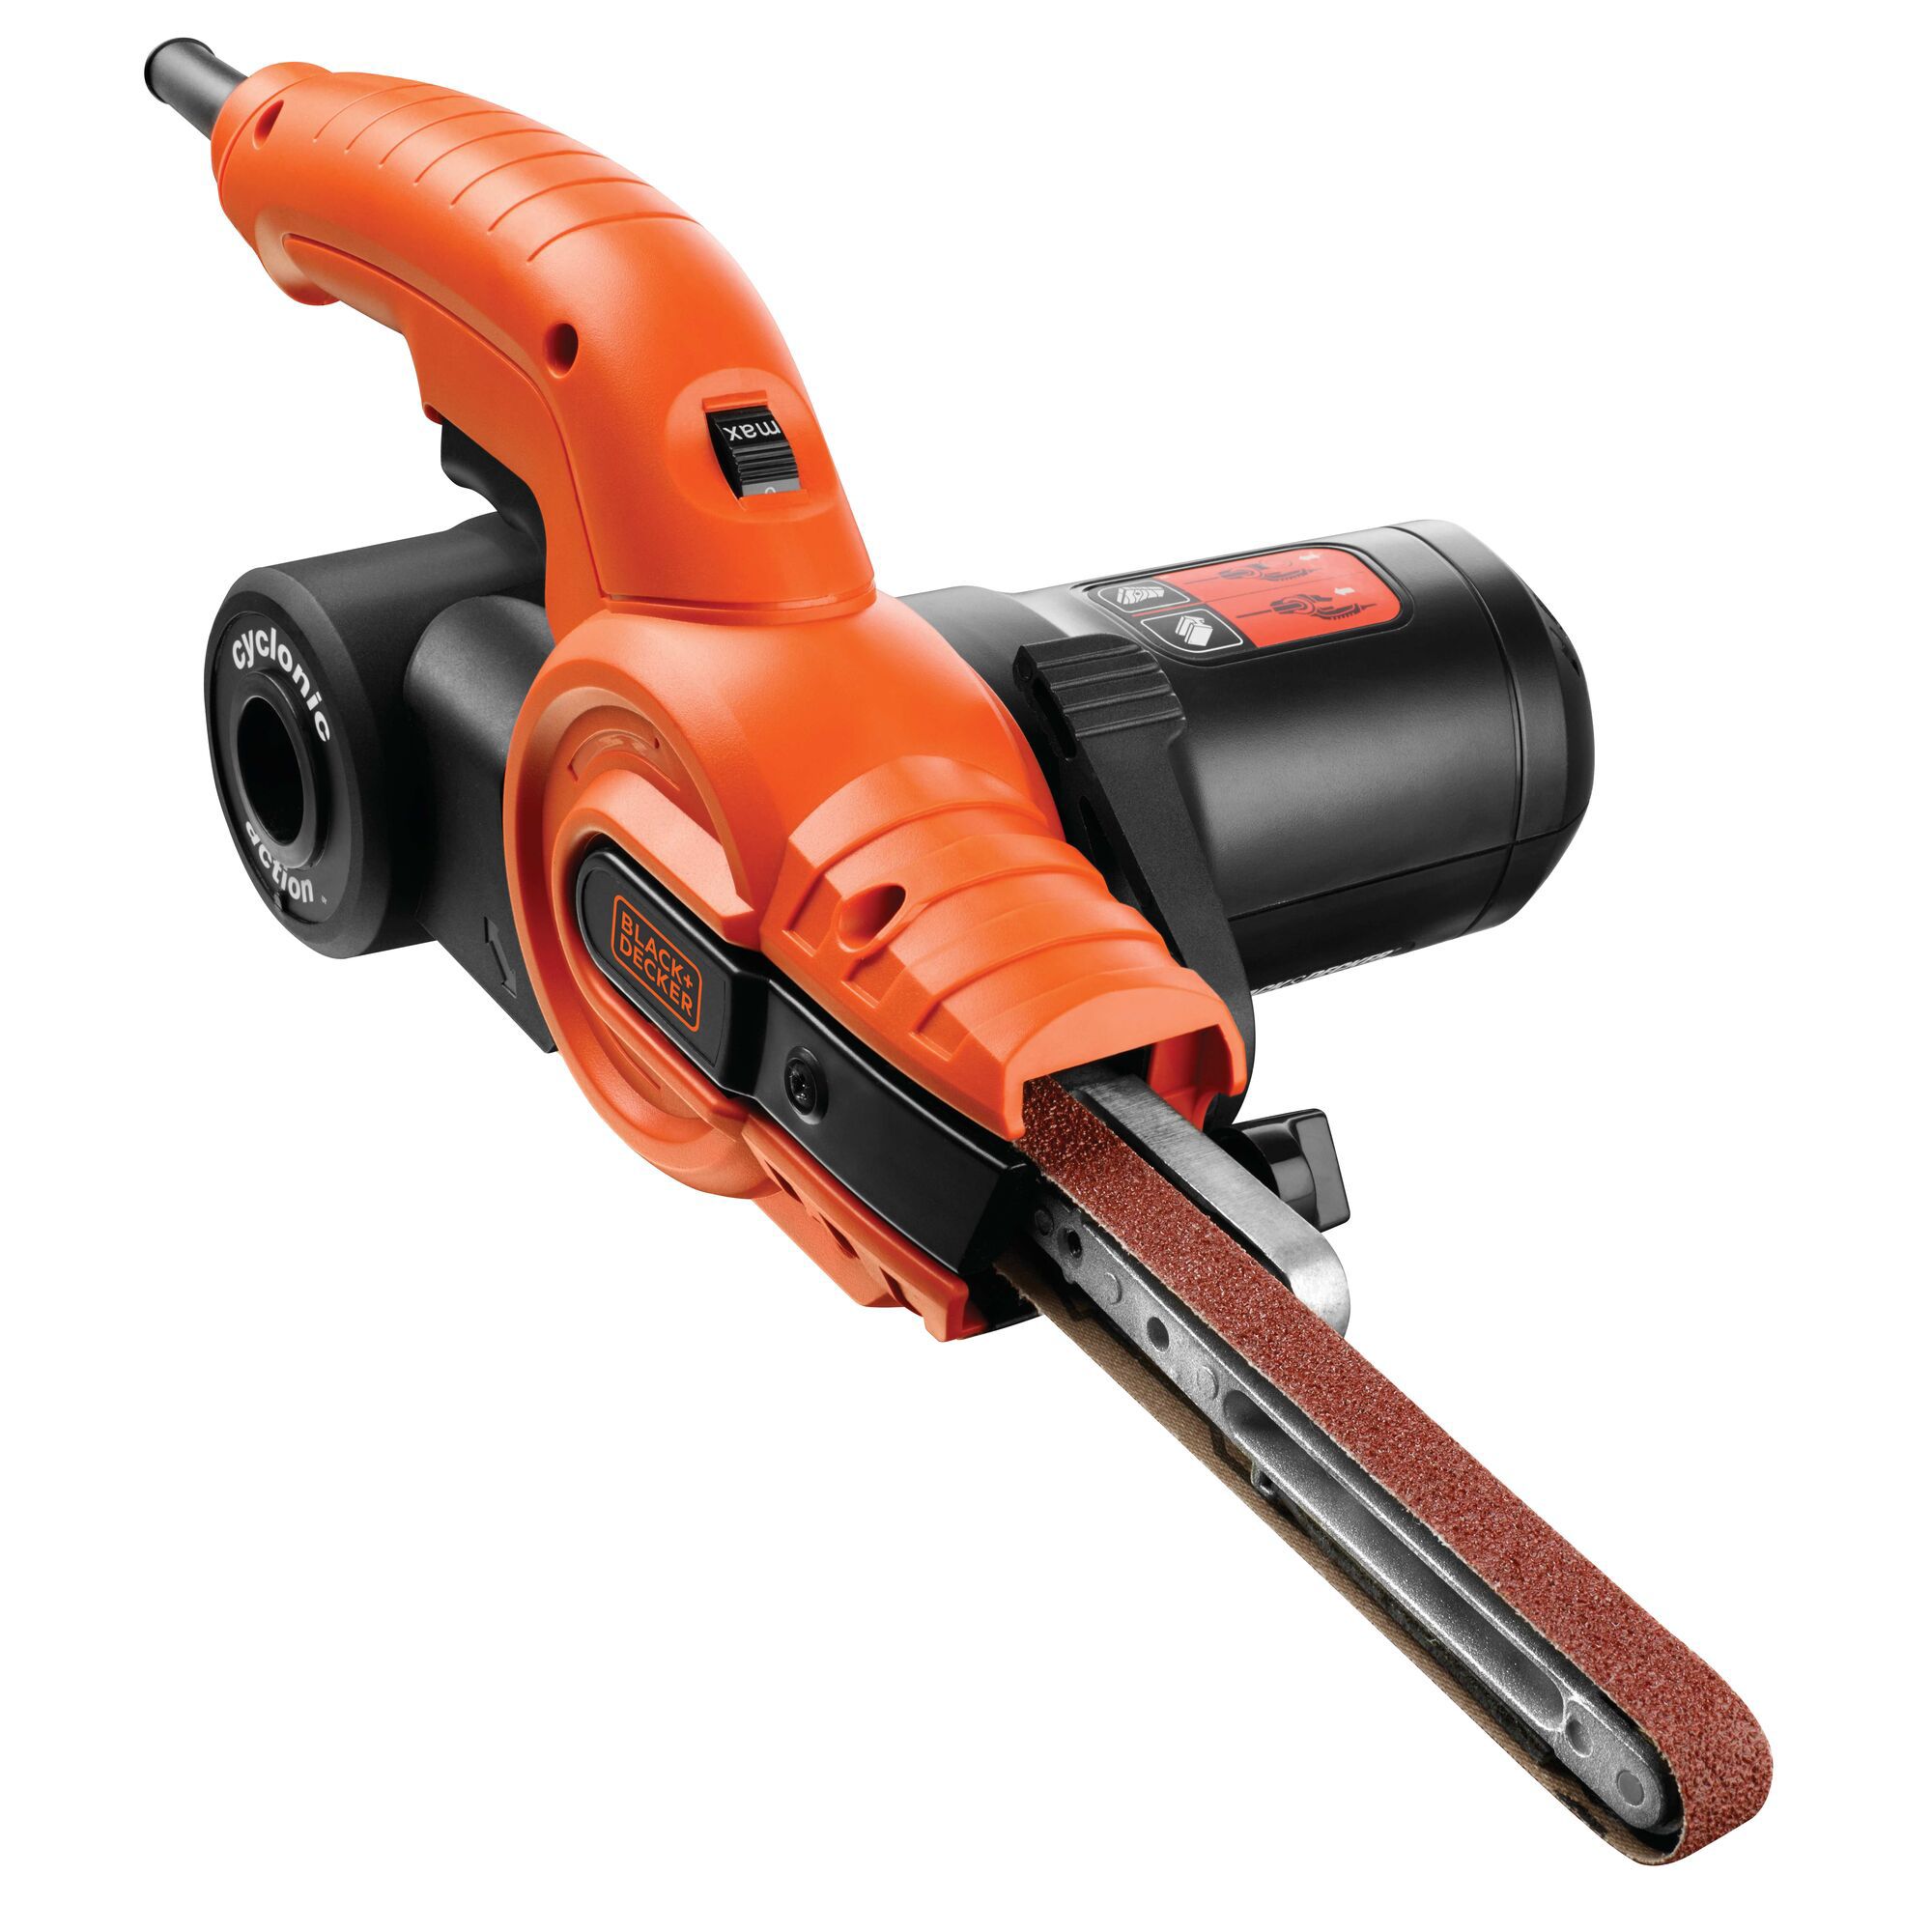 BLACK & DECKER BEW230BC-QS 55W Corded Mouse® sander with 15 accessories in  softbag